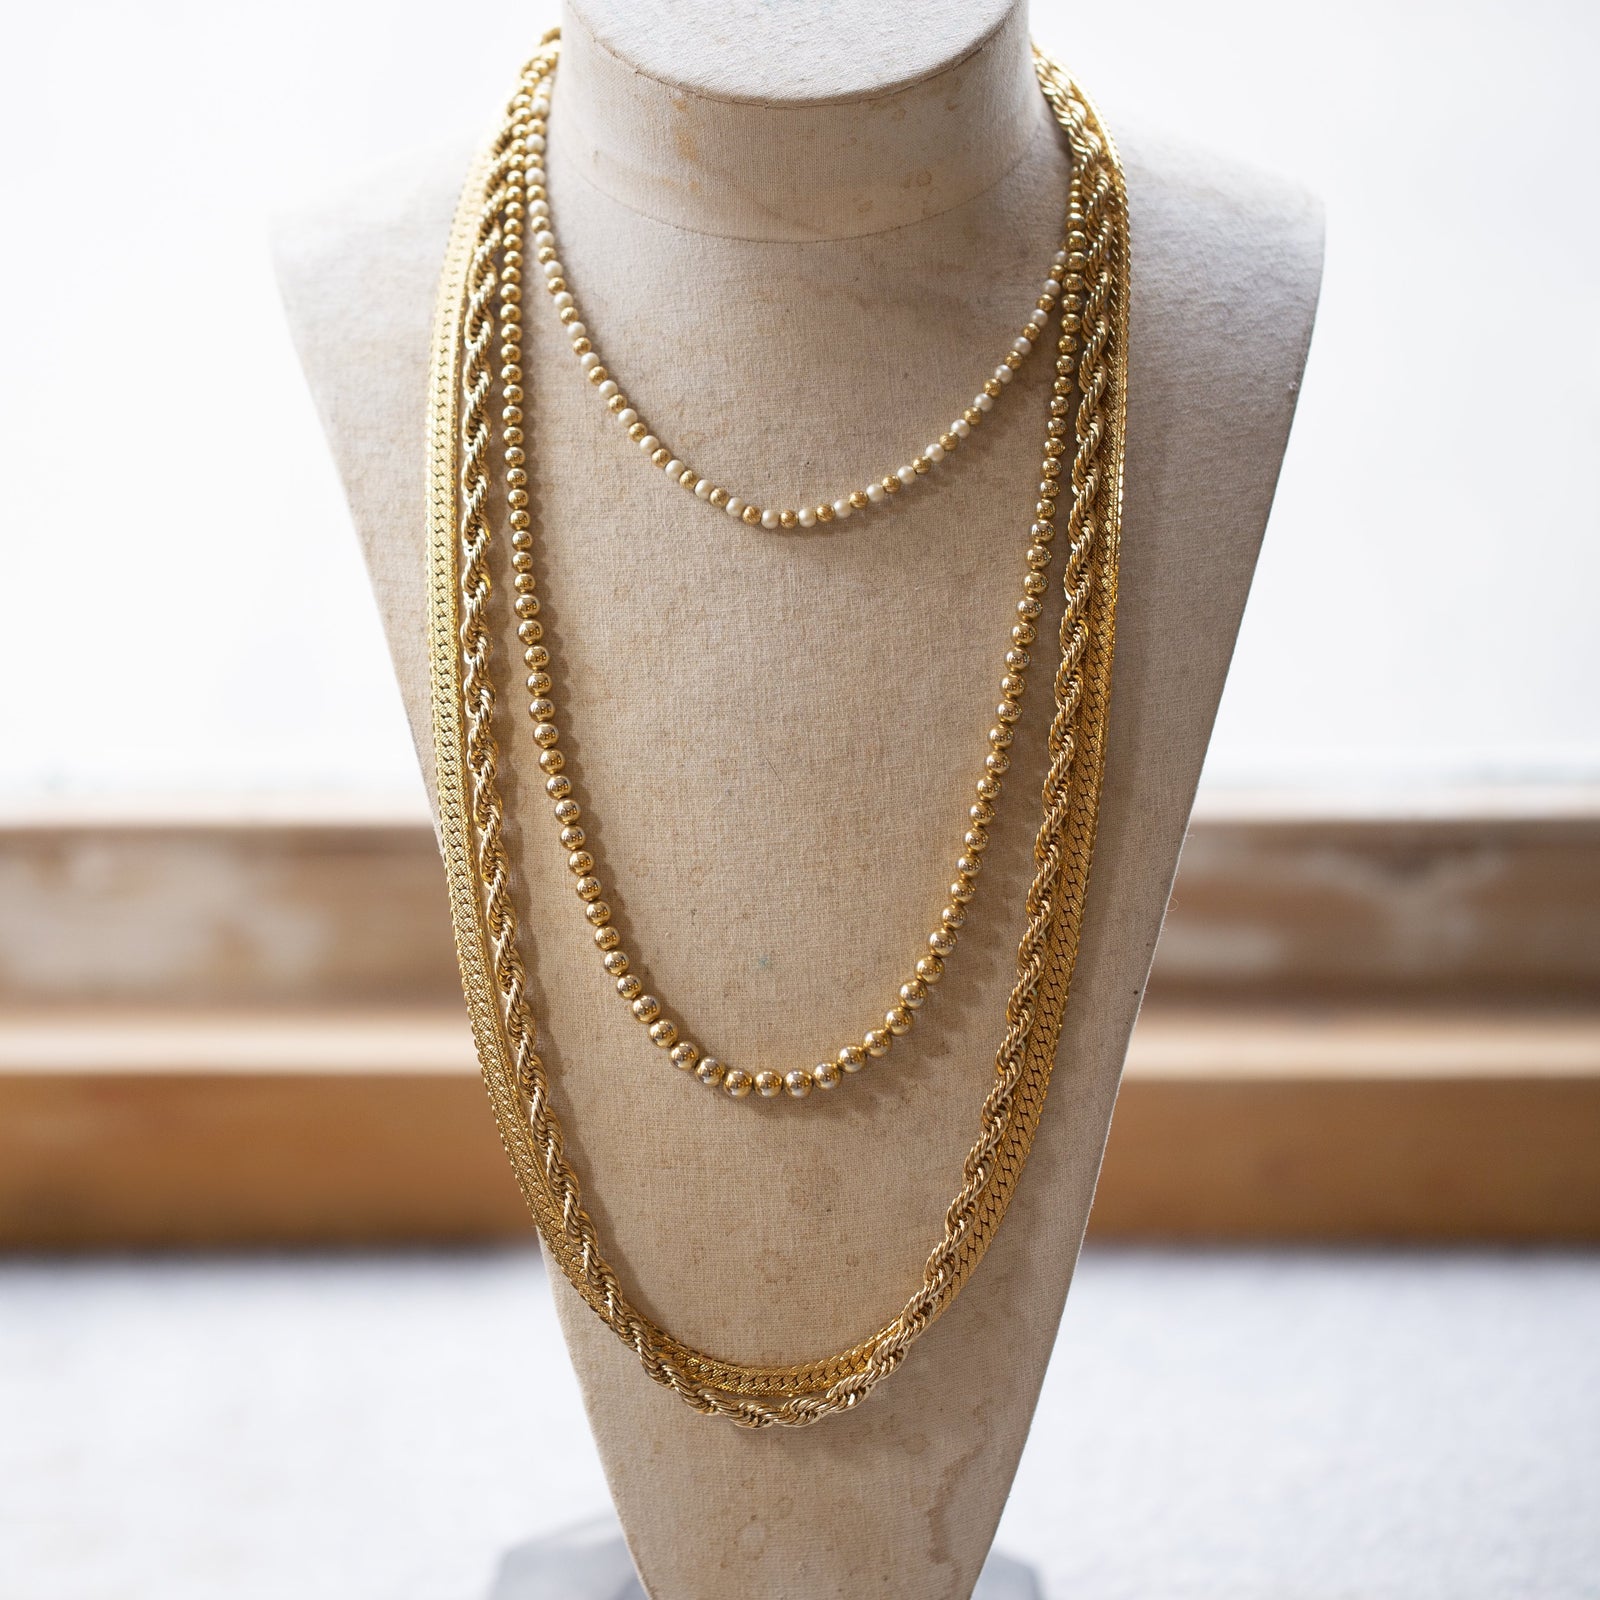 Gold Oval Necklace with Freshwater Pearls | JEWELRY | Met Opera Shop